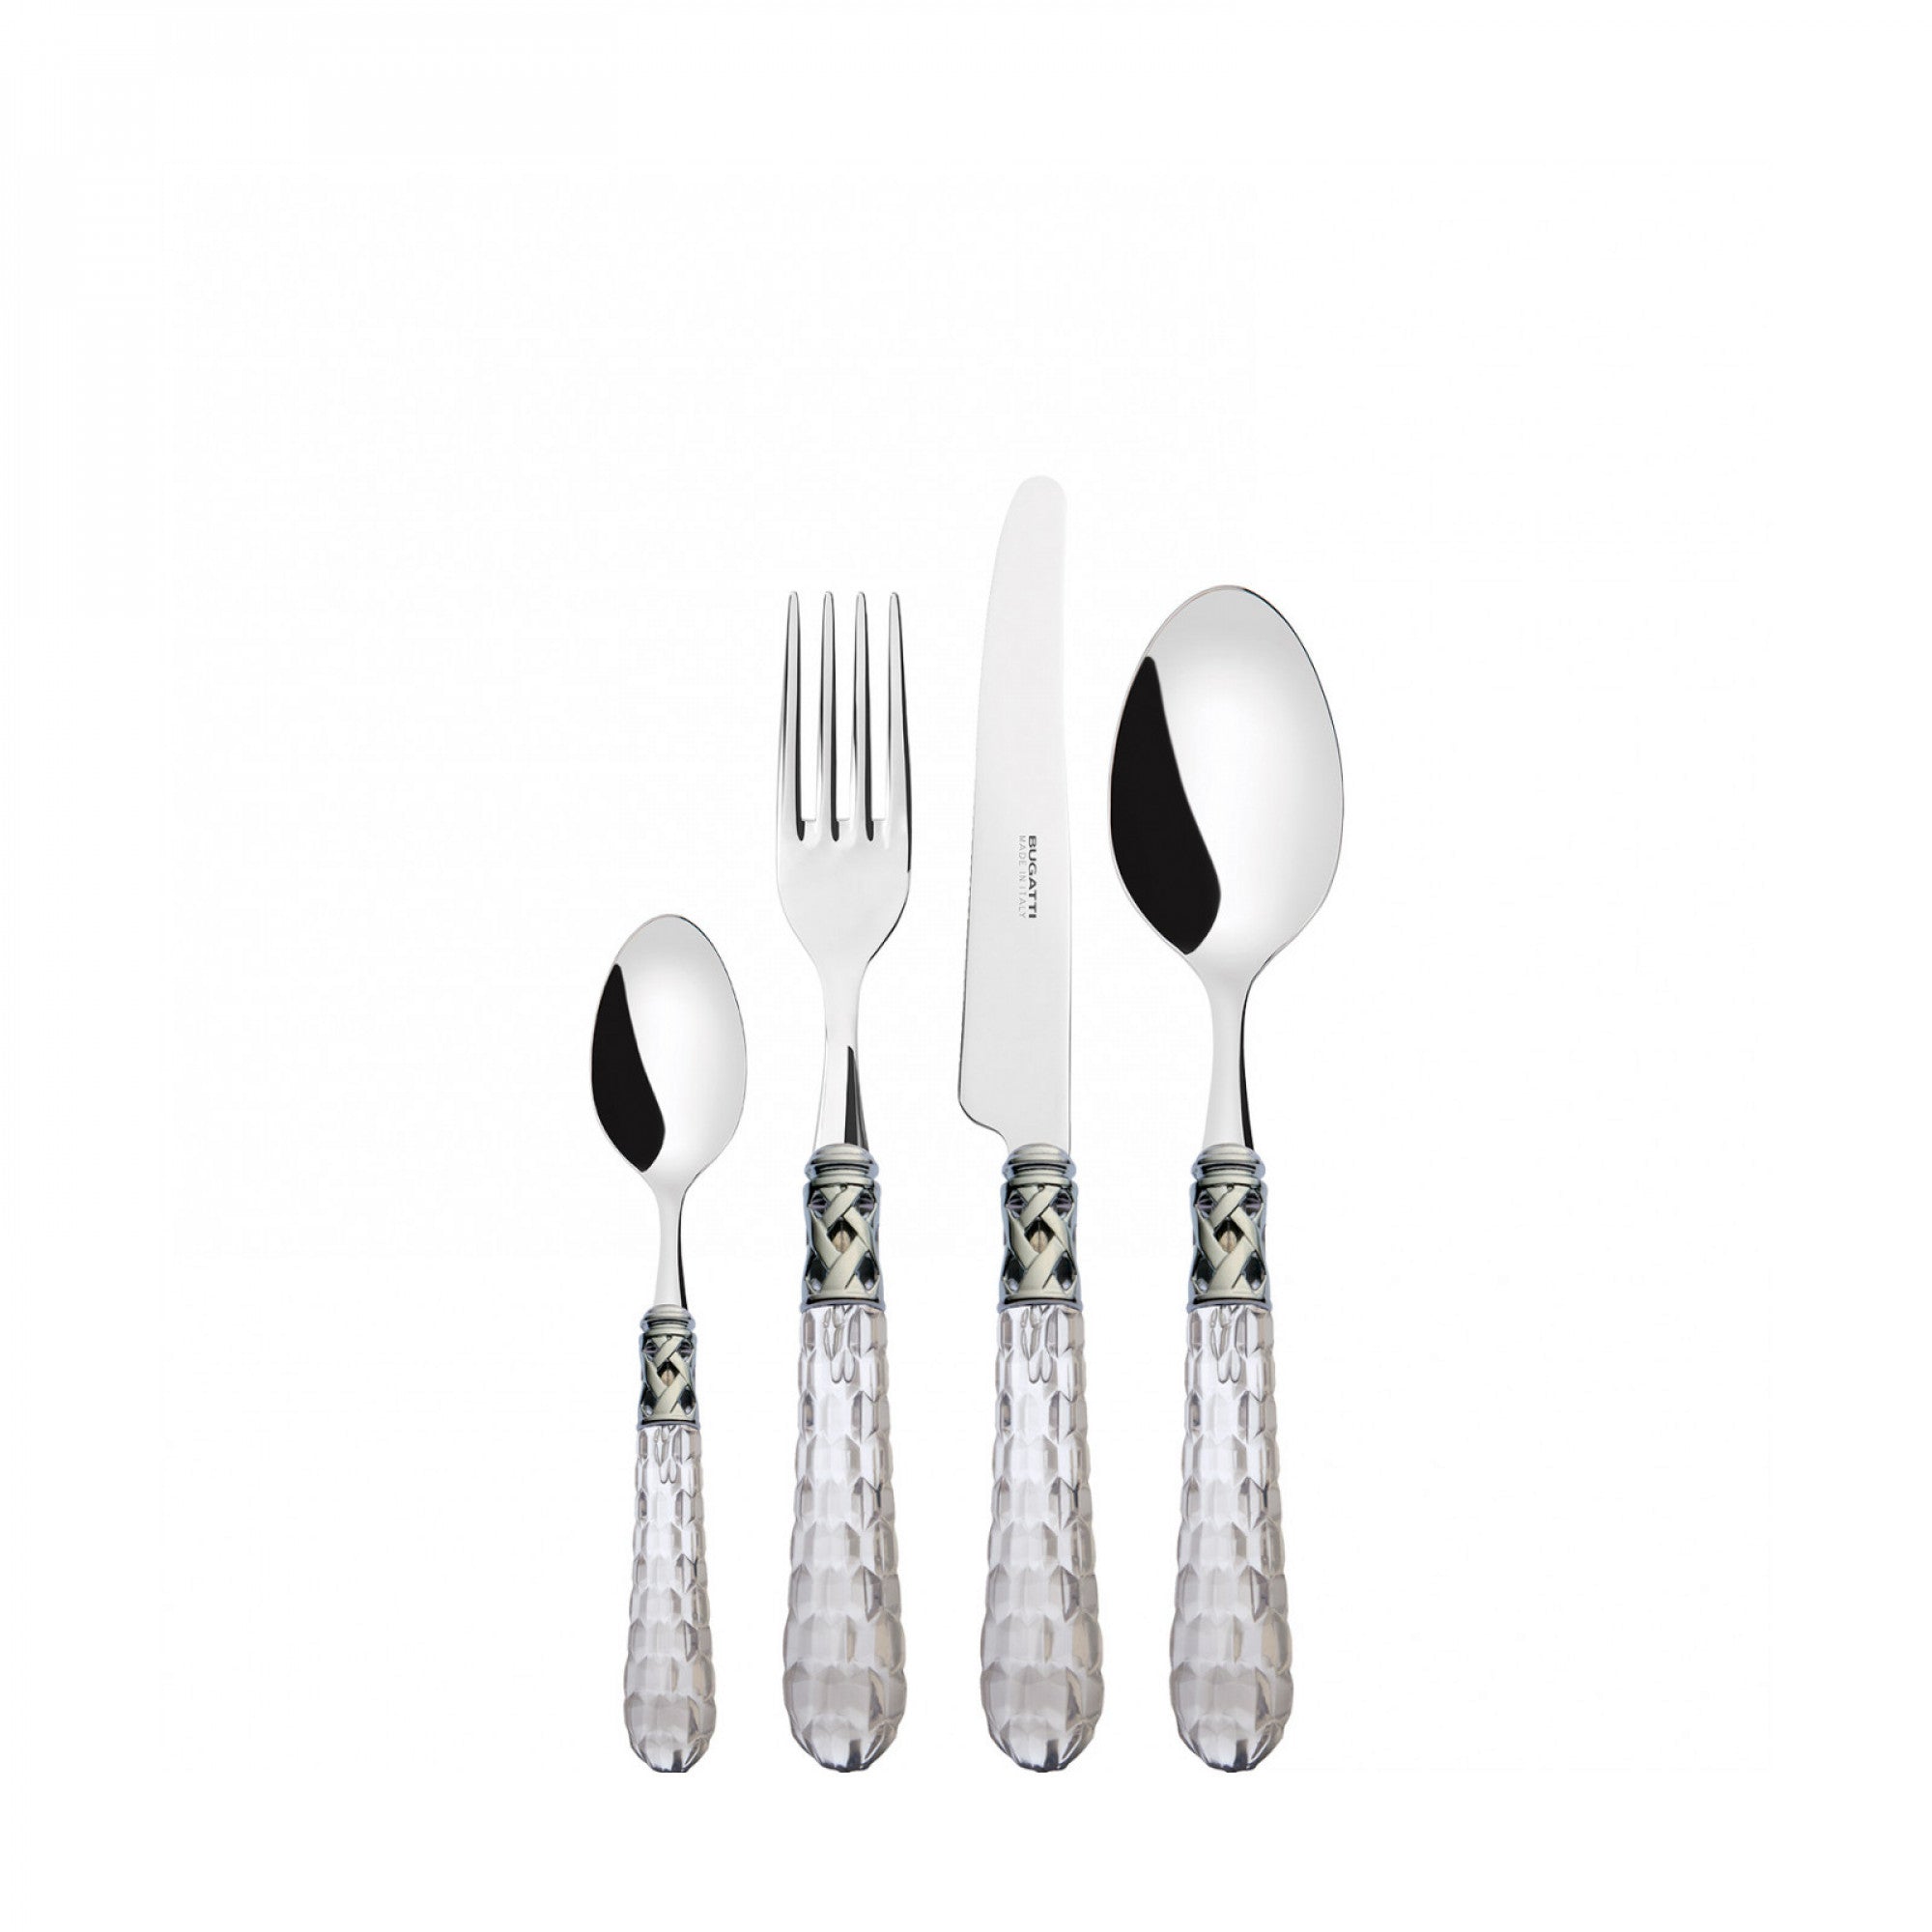 BUGATTI, Bohemia, 24-piece cutlery set in 18/10 stainless steel, chromed ring. Packed in Gallery box